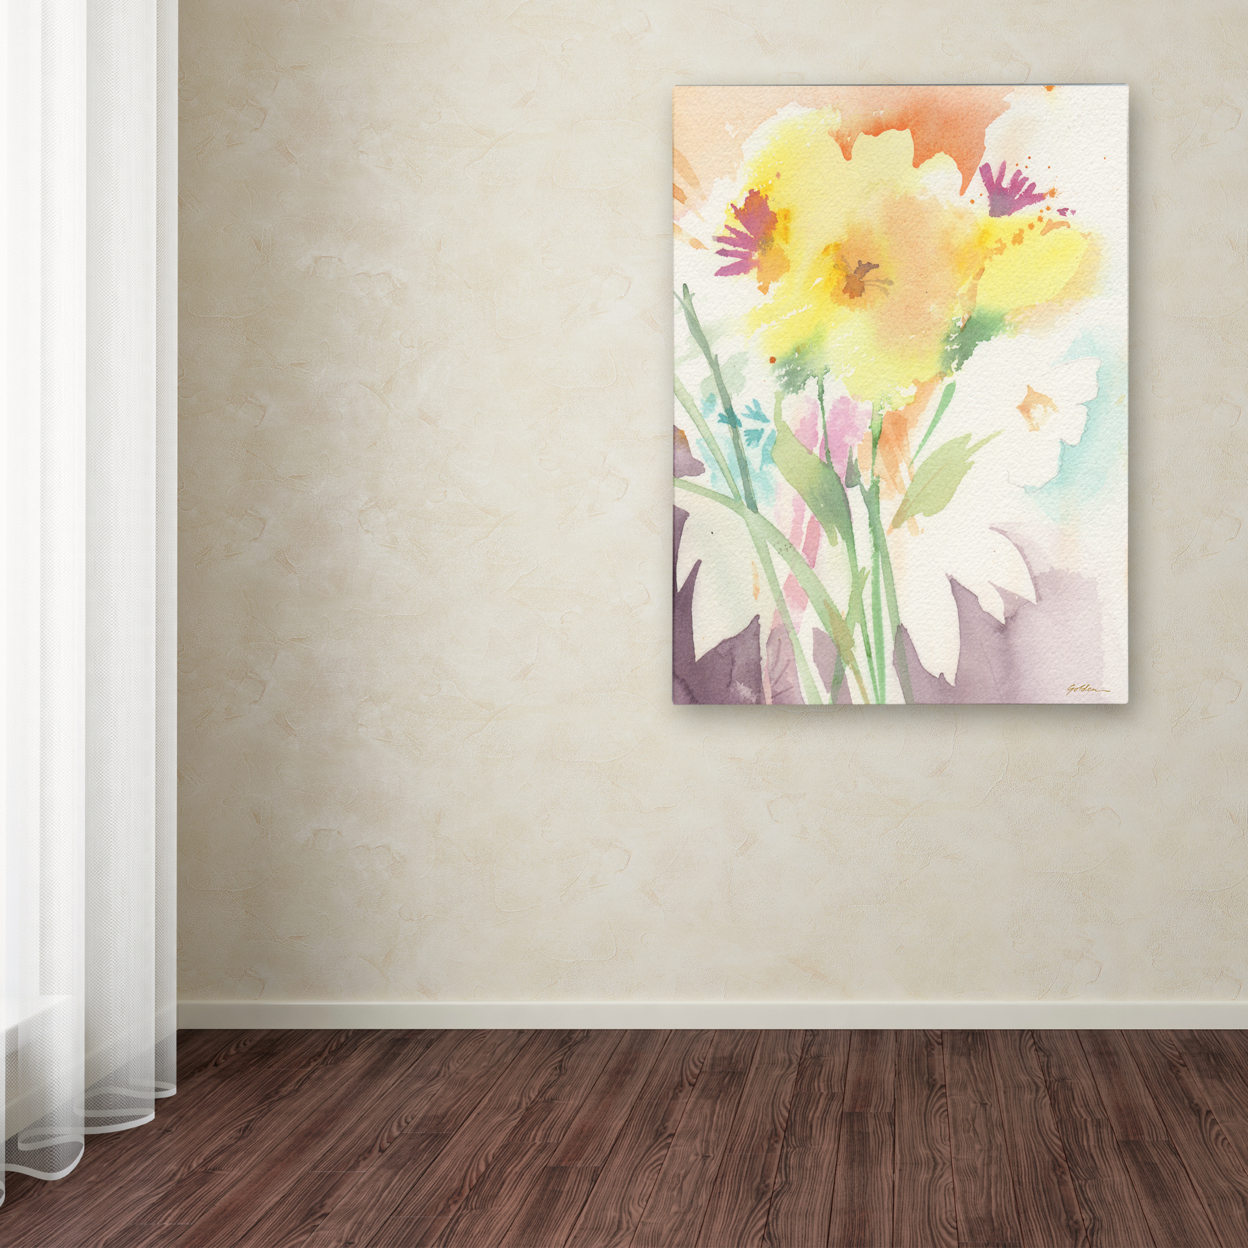 Sheila Golden 'Yellow Flower Blossoming' Canvas Wall Art 35 X 47 Inches